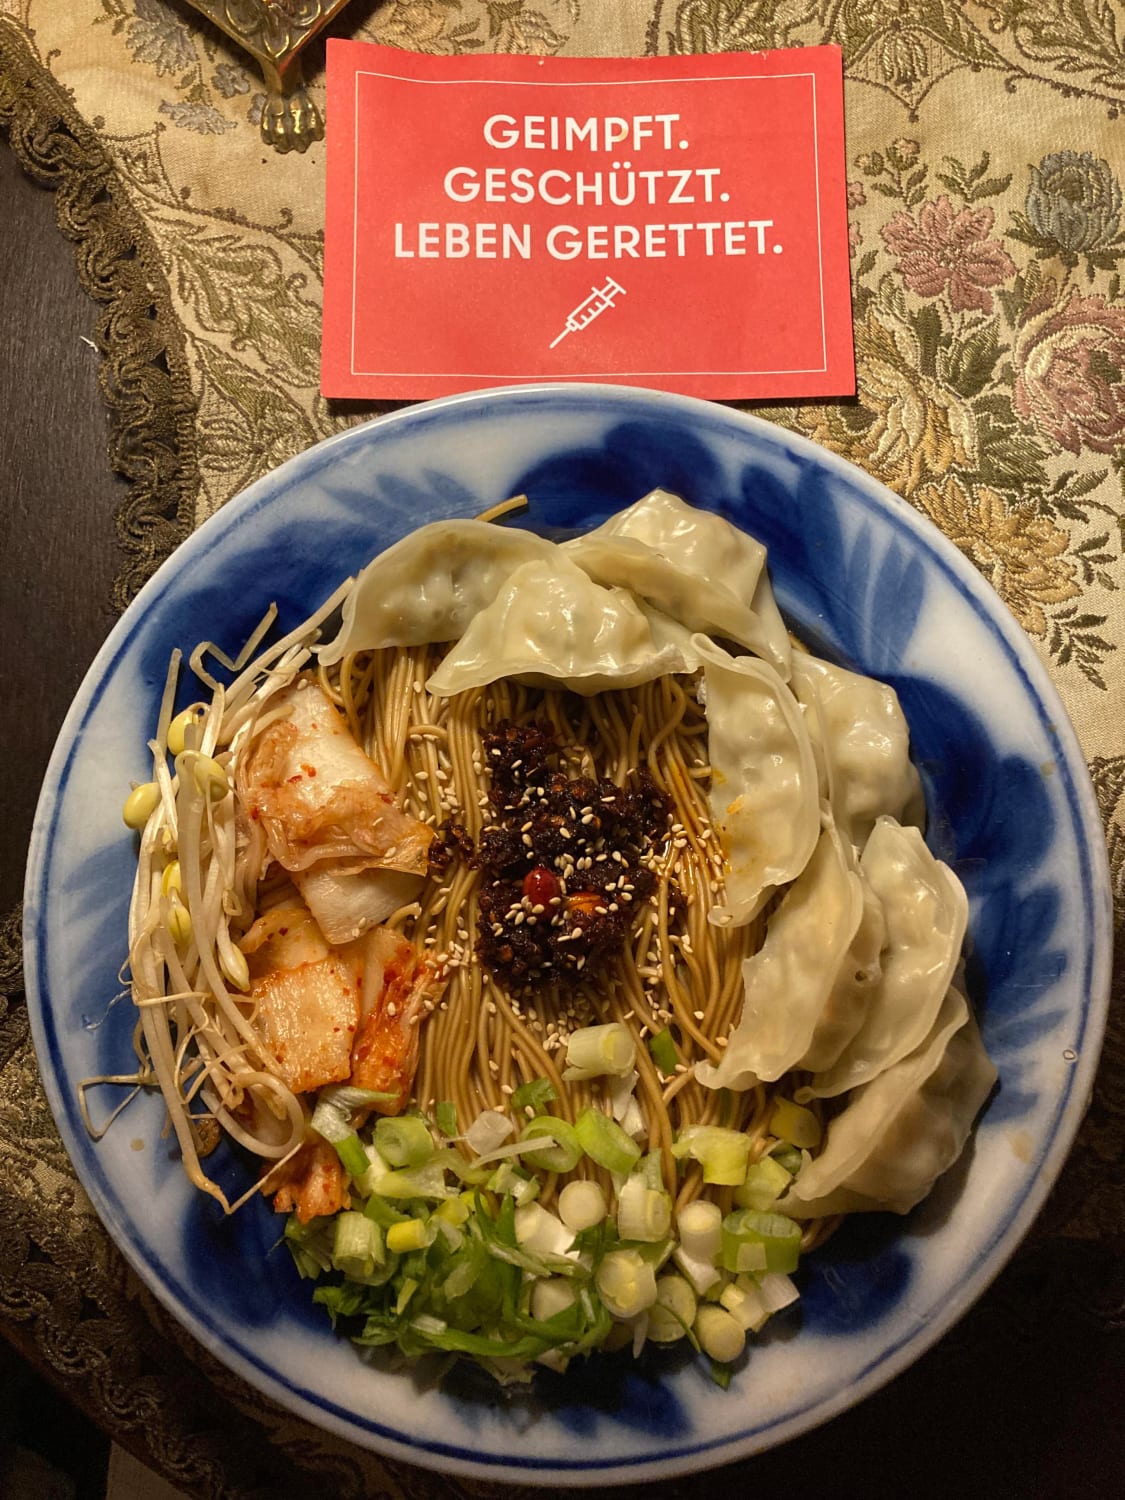 Greetings from Germany! At home feeling sick after my booster shot, so I quickly whipped up some ramen (broth: ginger+mushroom dark soy sauce+Soon veggie ramen seasoning packet) with various add-ons: (veggie dumplings, spring onions, kimchi, bean sprouts, sesame seeds, and Lao Gan Ma chili crisp)